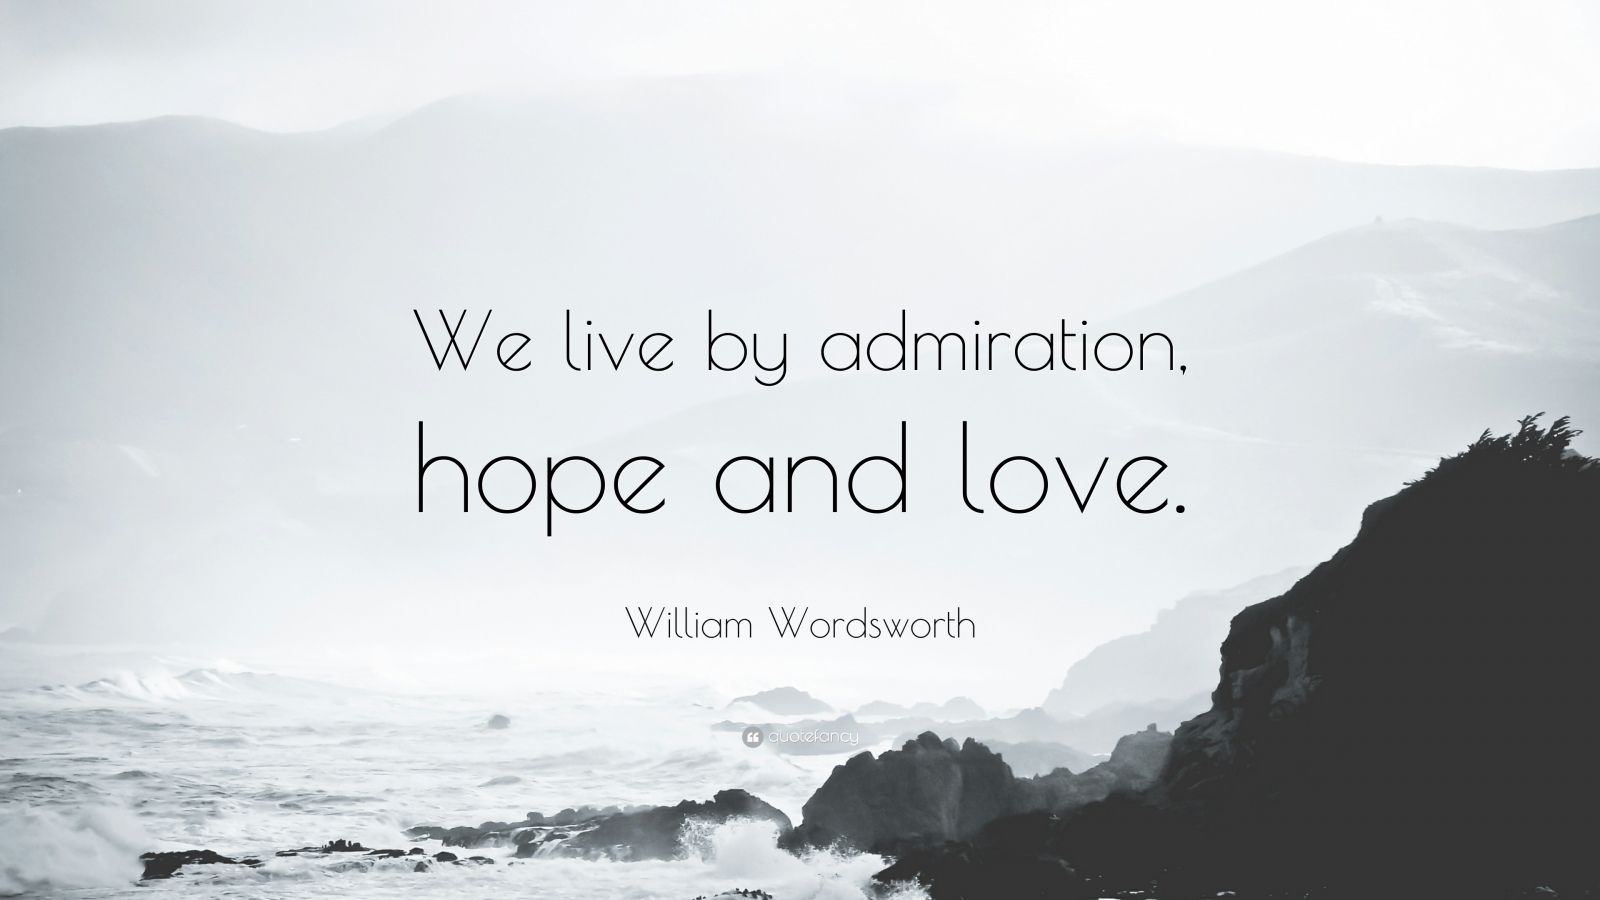 William Wordsworth Quote “We live by admiration hope and love ”